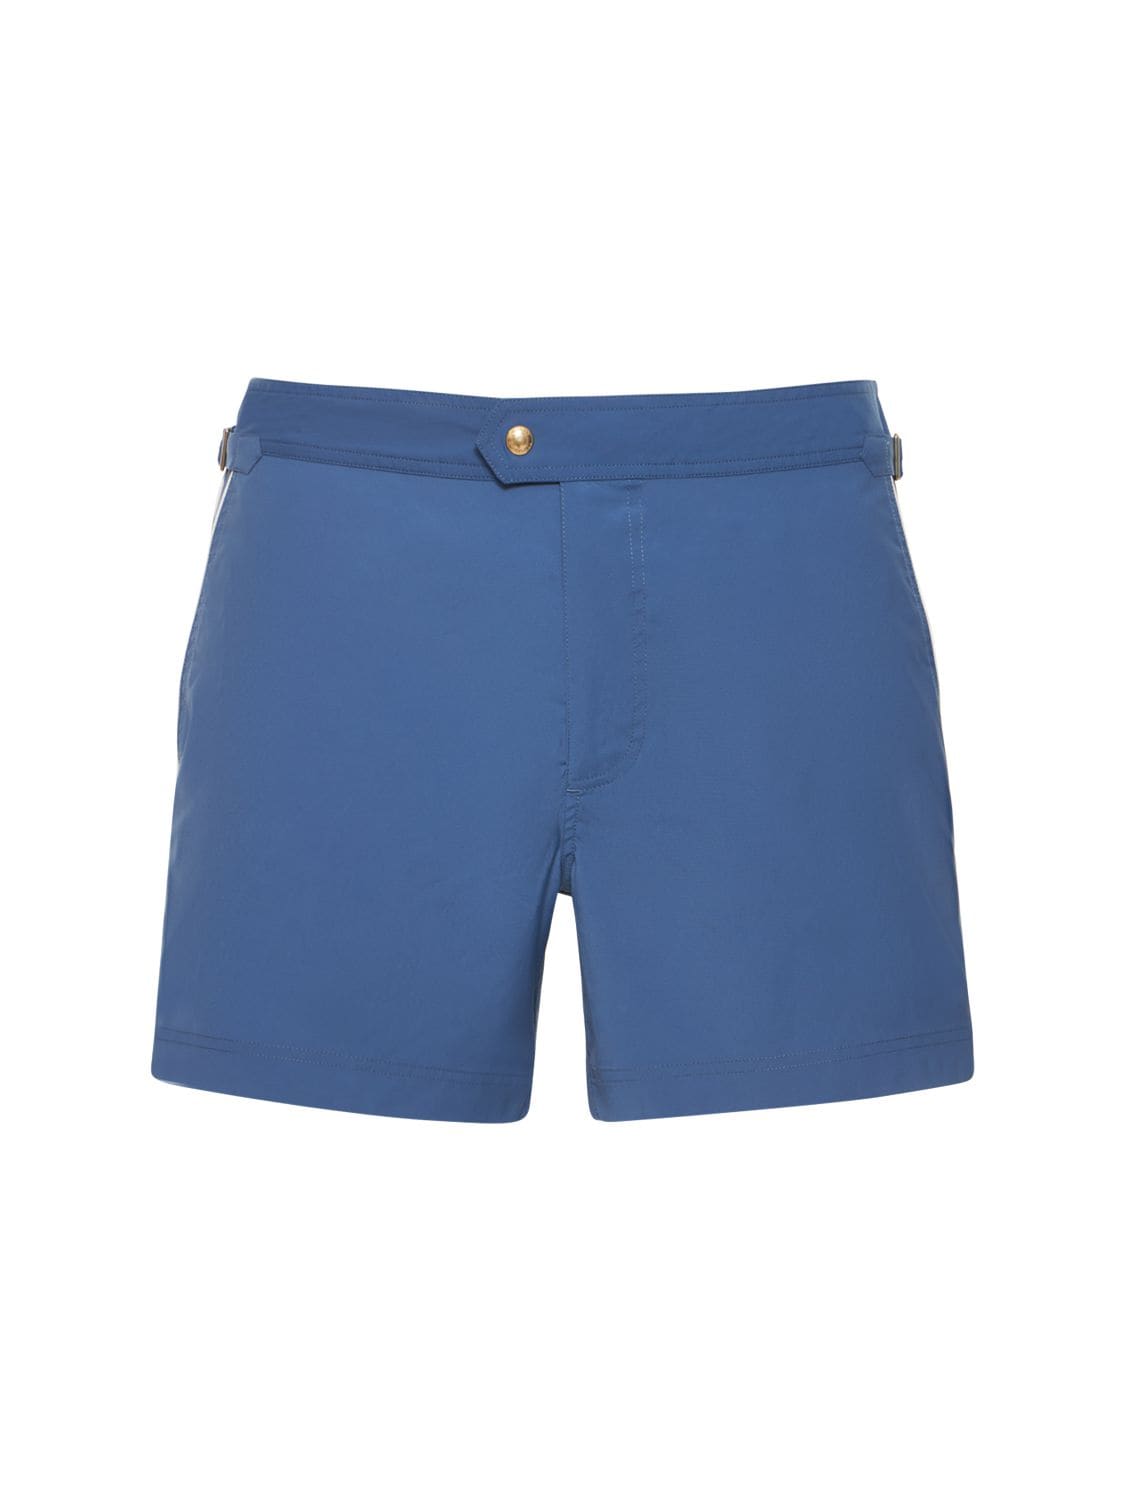 Tom Ford Compact Poplin Swim Shorts W/ Piping In Blue